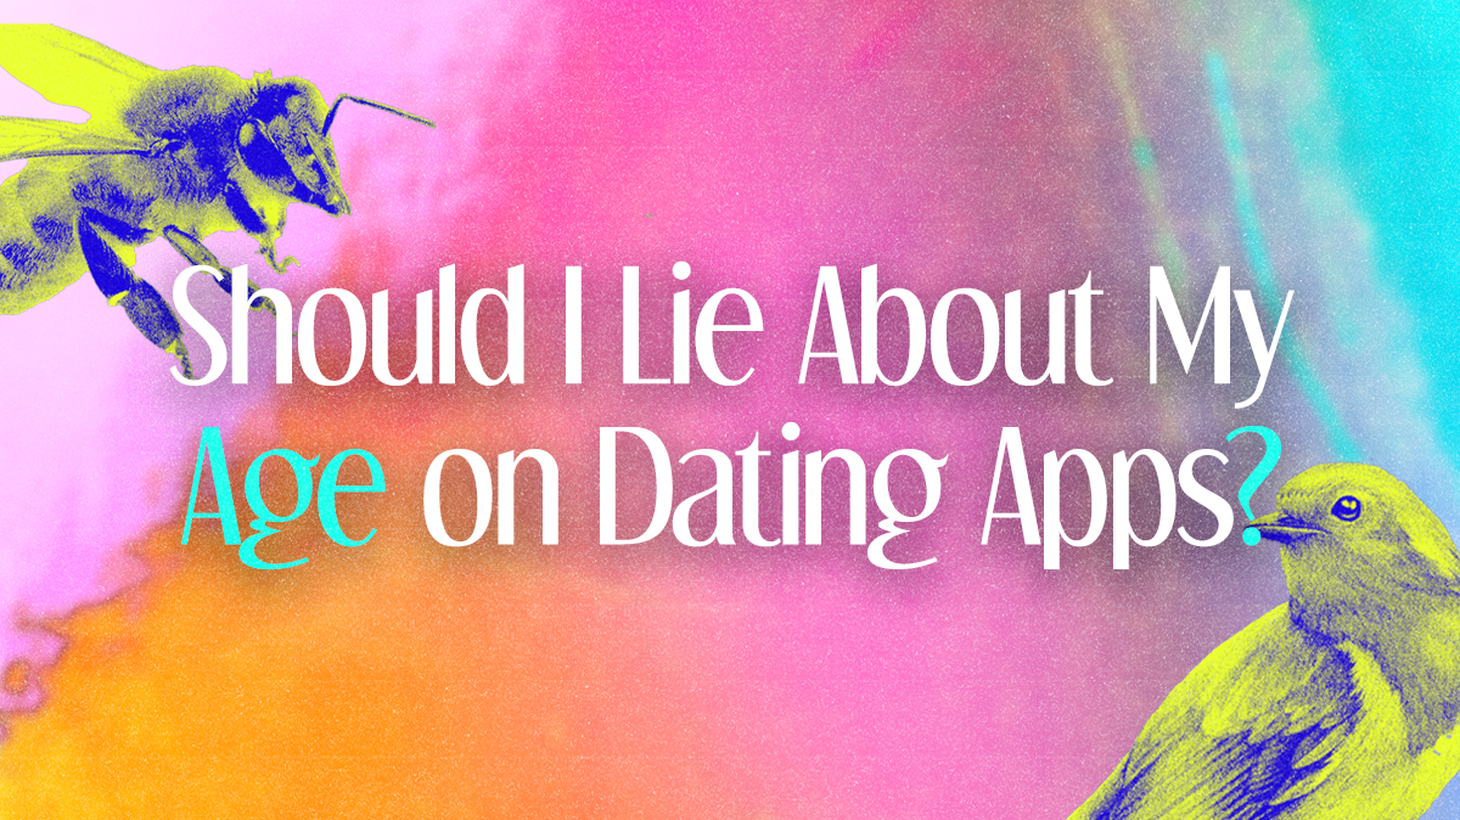 Damona Hoffman, host of the Dates & Mates podcast, drops by to answer your questions alongside Myisha. Should you lie about your age on dating apps? What are the pros and cons of changing your last name when getting remarried as a widow?